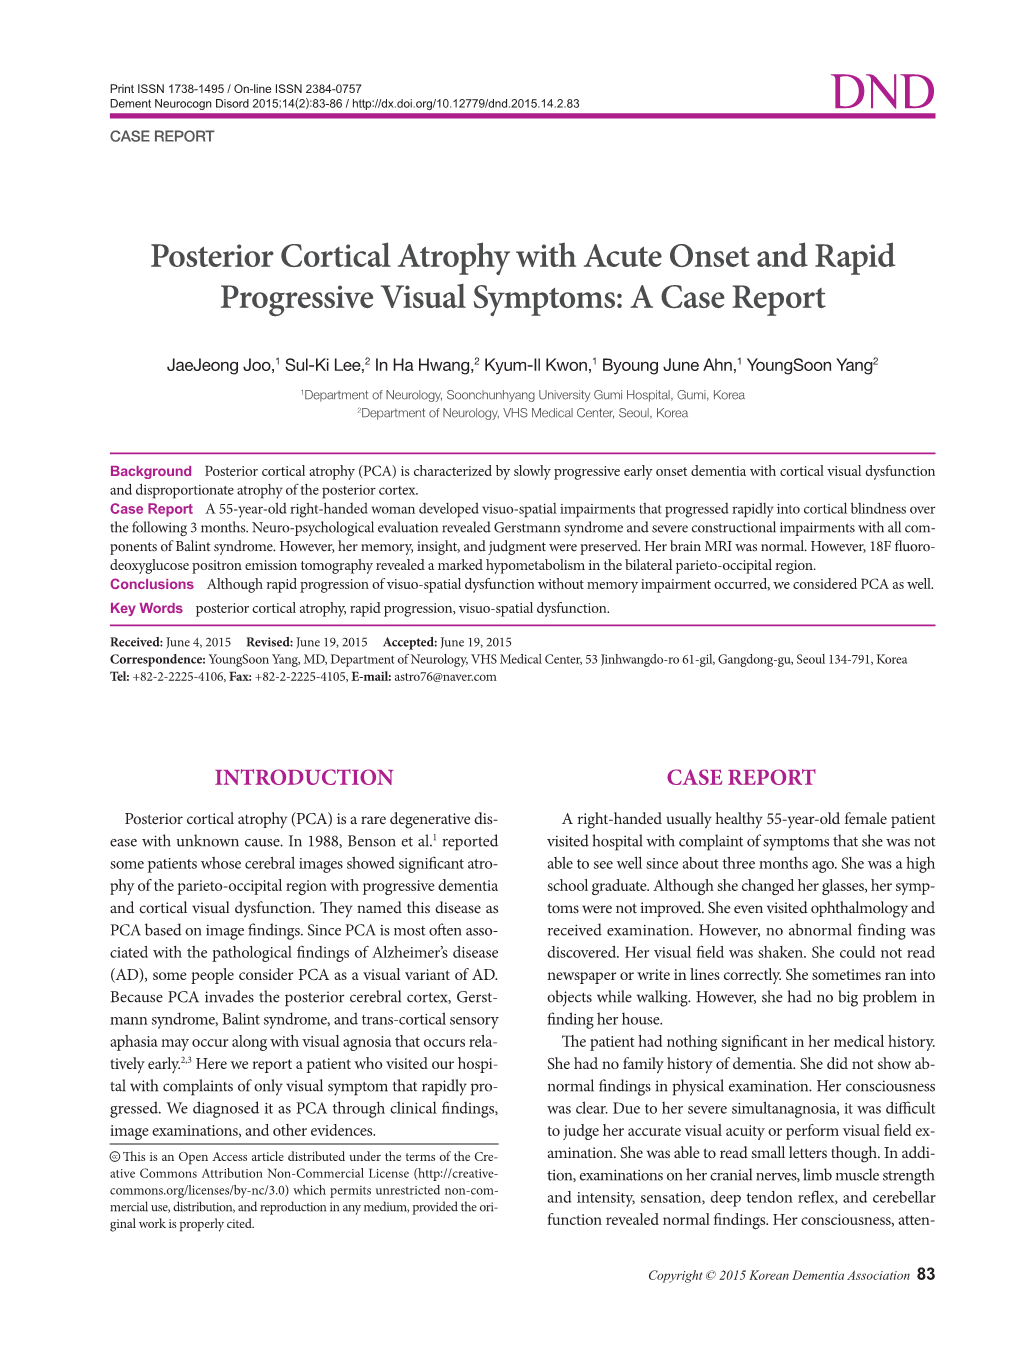 Posterior Cortical Atrophy with Acute Onset and Rapid Progressive Visual Symptoms: a Case Report